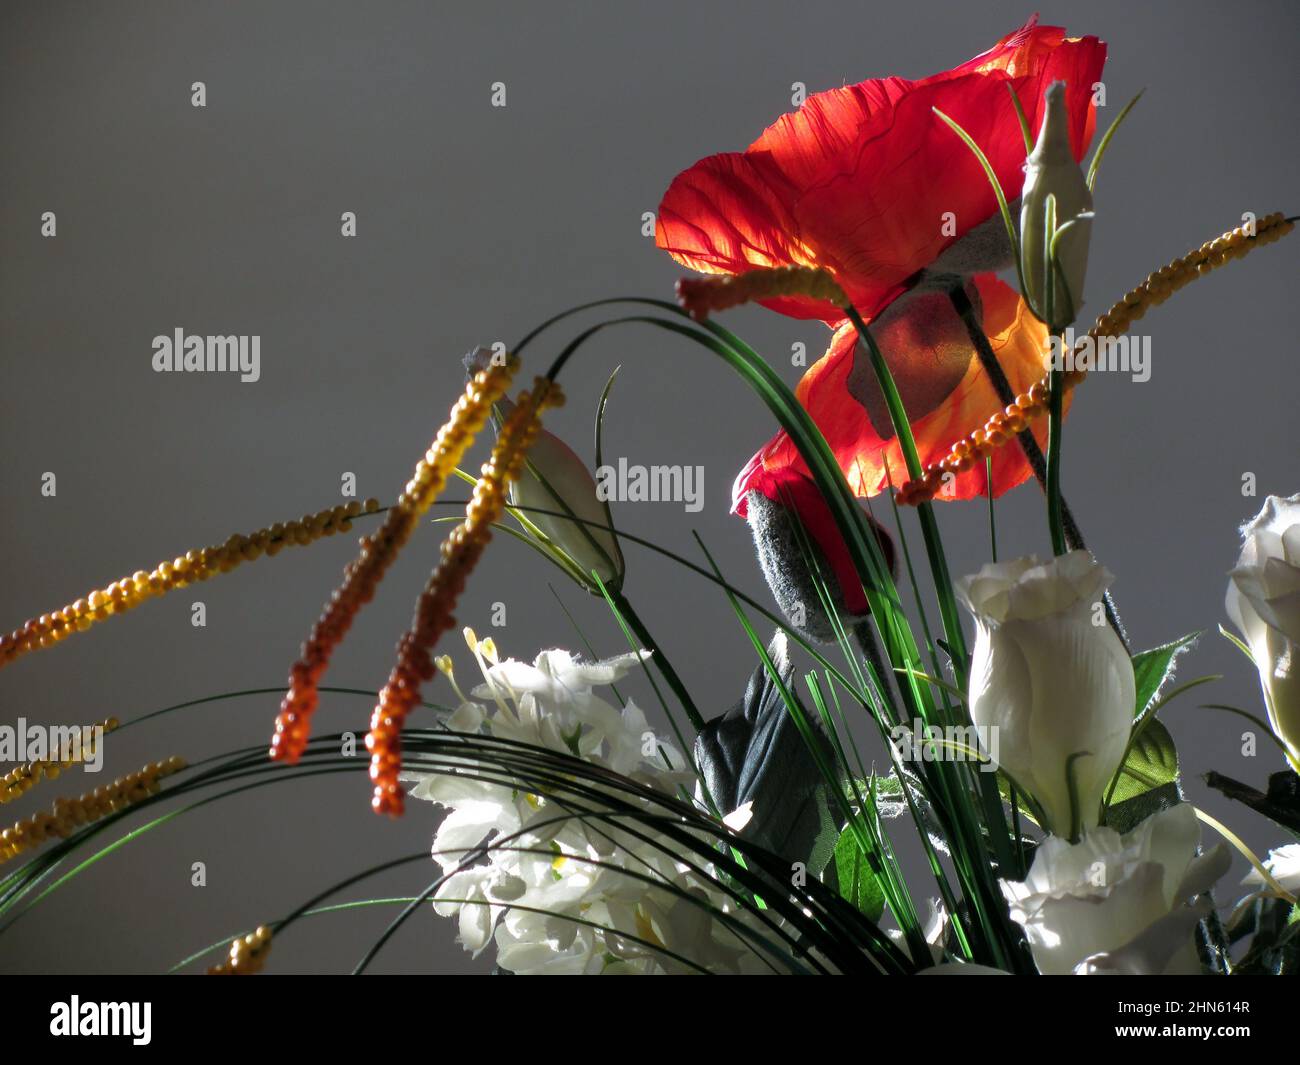 Composition of flowers Stock Photo